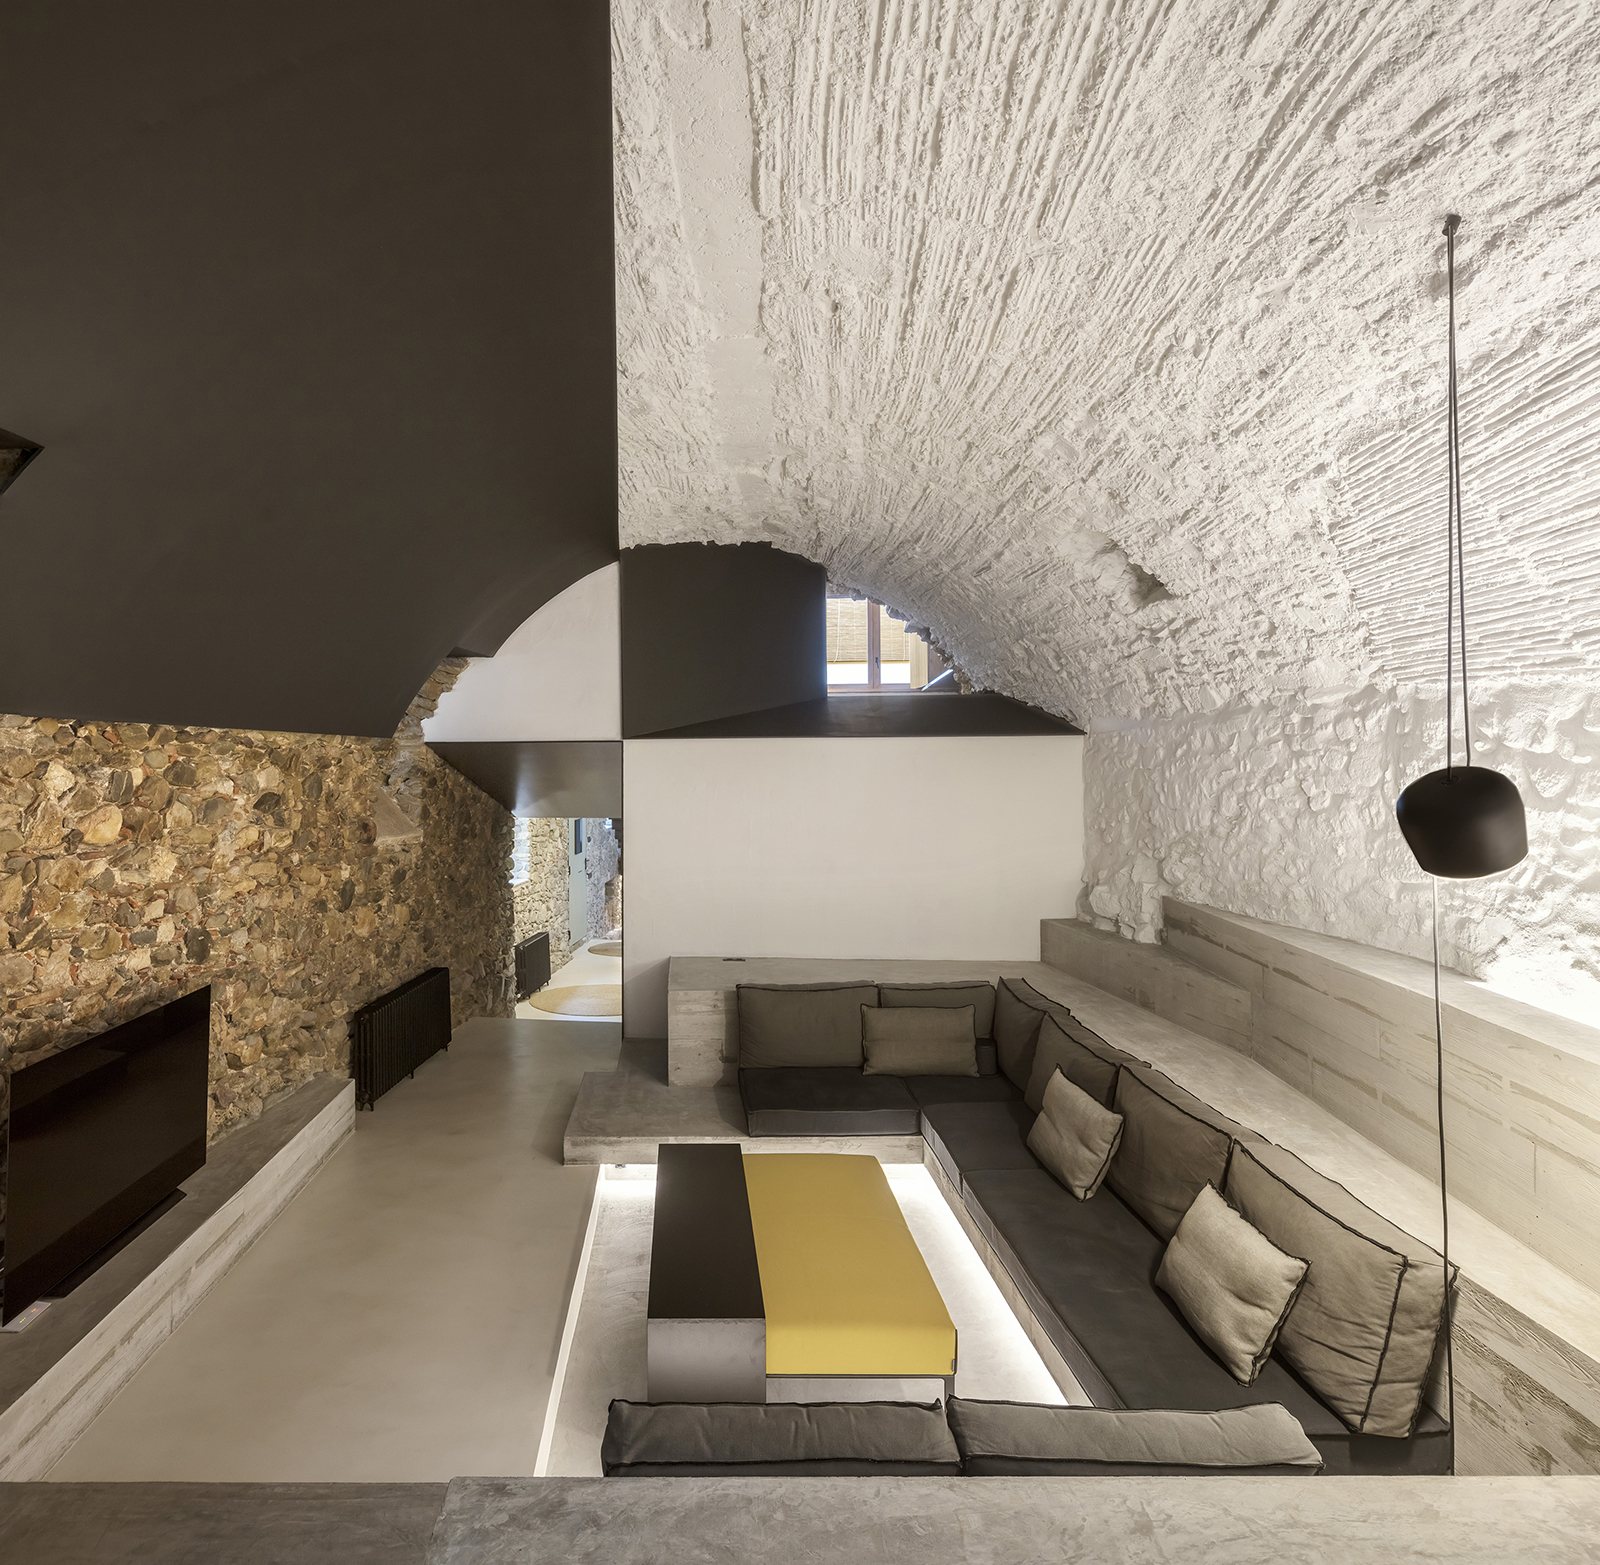 Archisearch Renovation of a town house, Cruïlles, Girona | Majoral Tissino architects